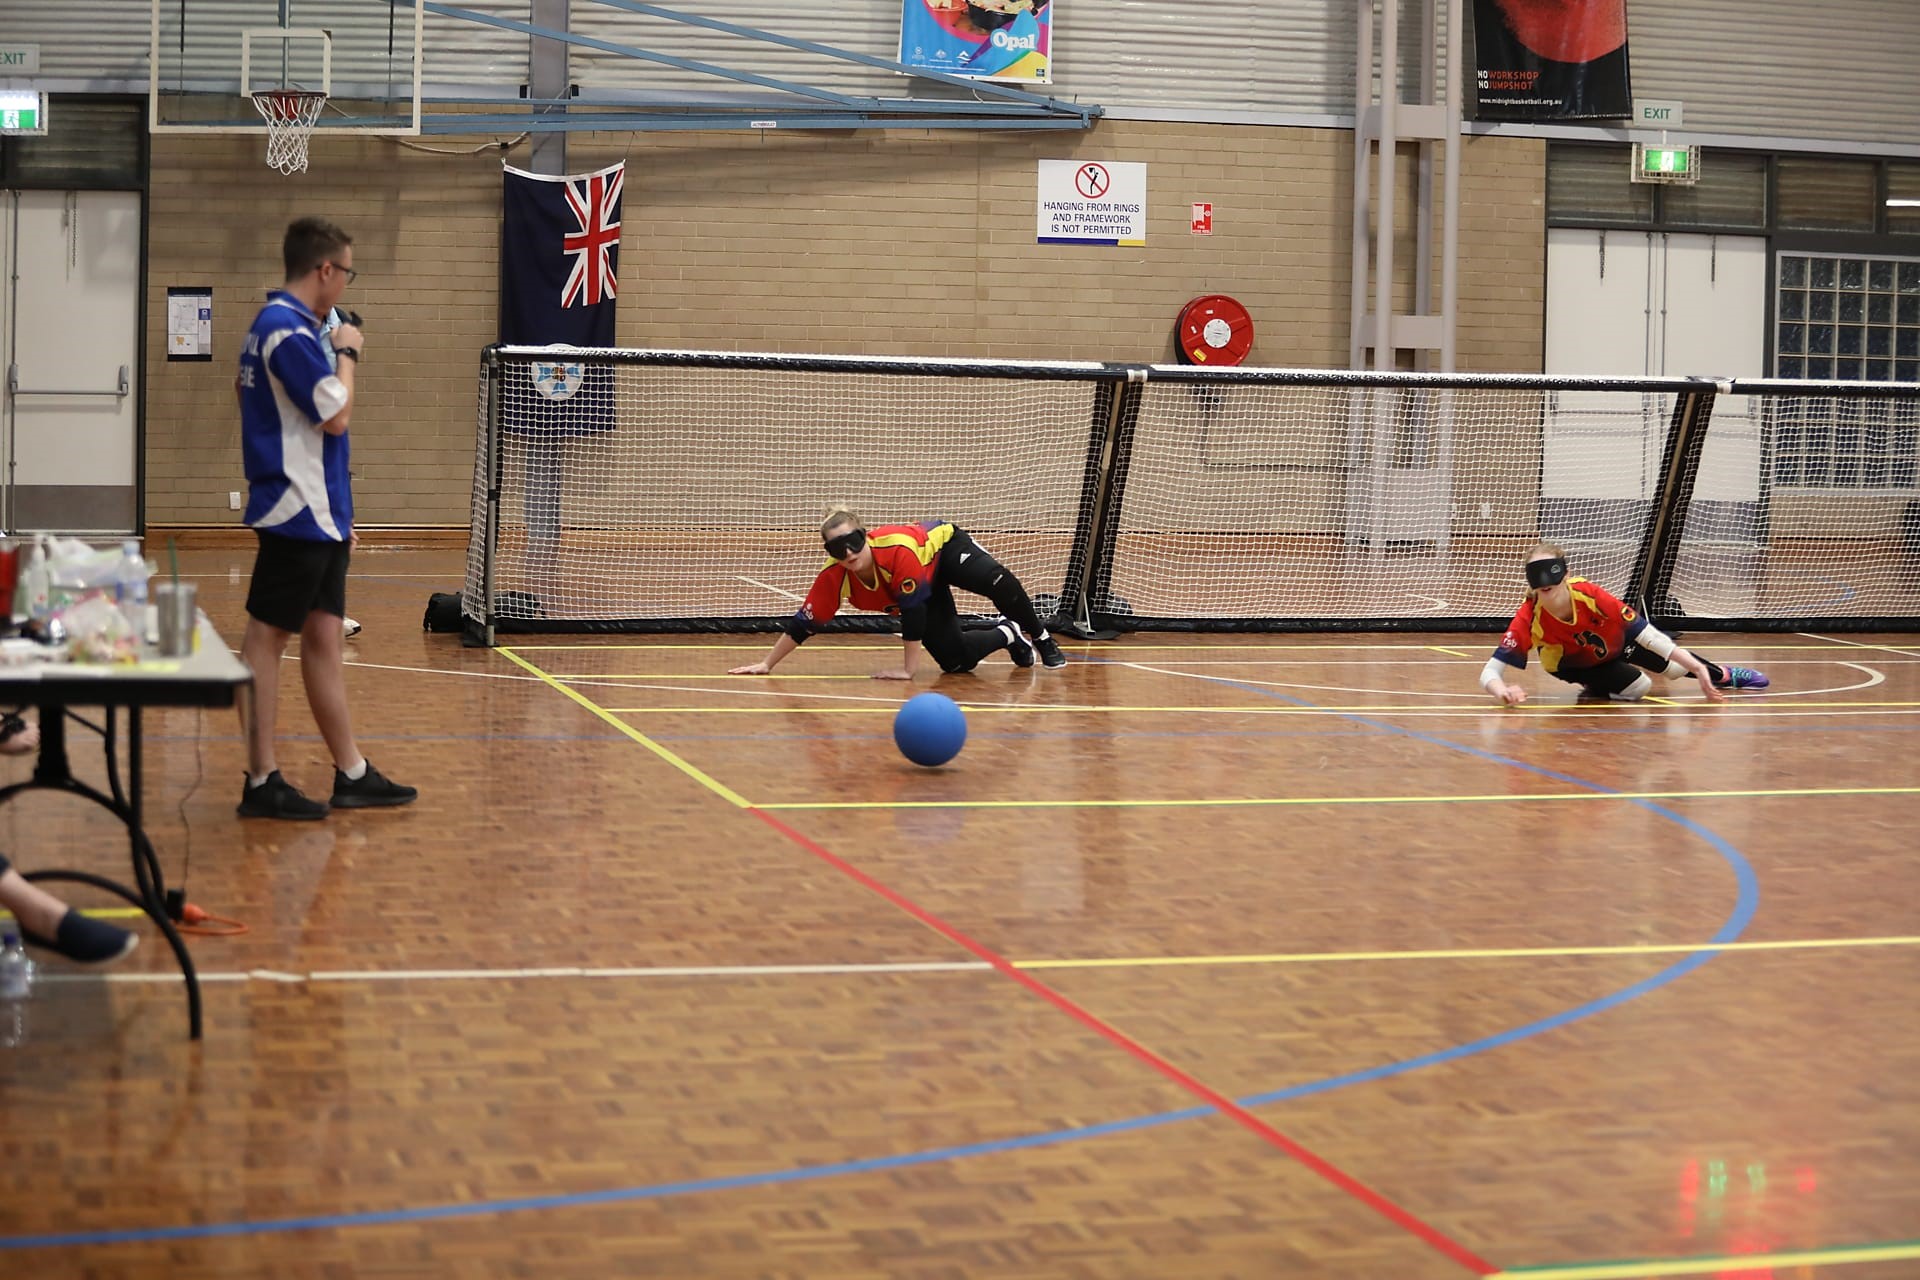 A blue ball rolls towards two women lying on the ground. A man on the left side of the court holds a microphone and is looking at the women. 